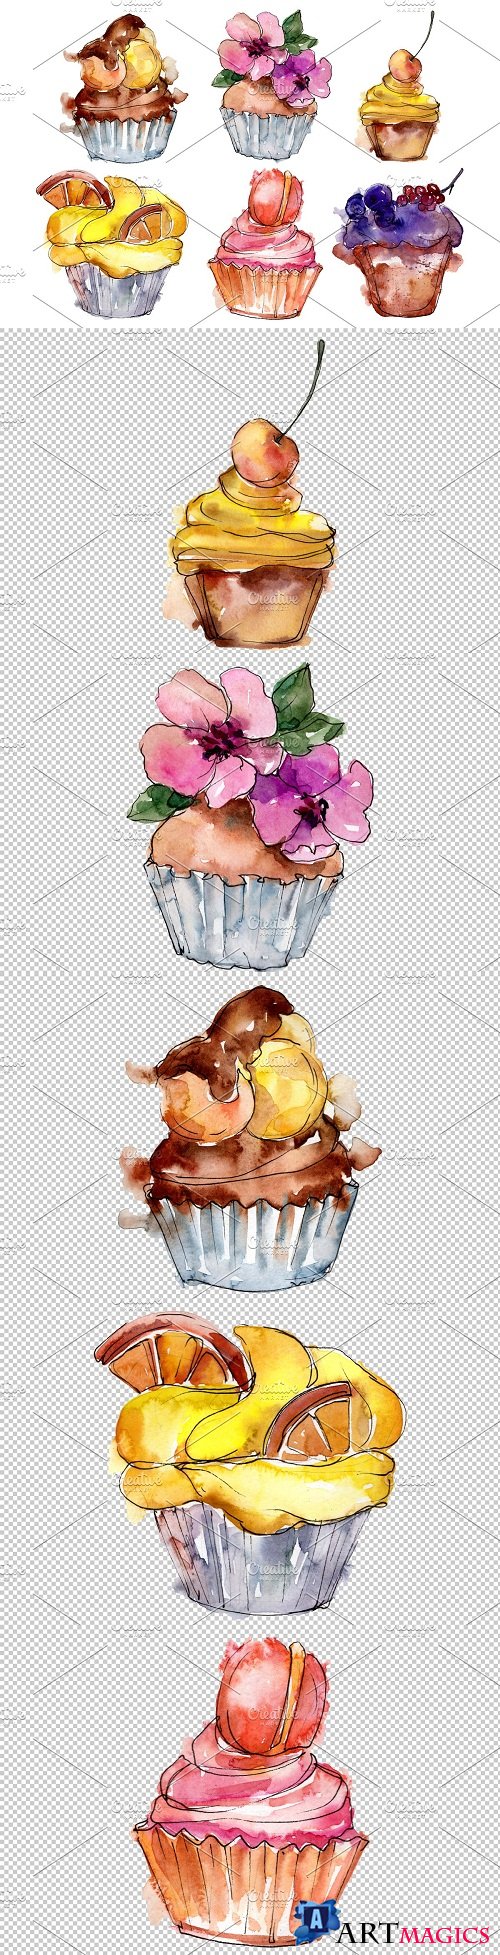 Dessert friday Watercolor png - 3568196